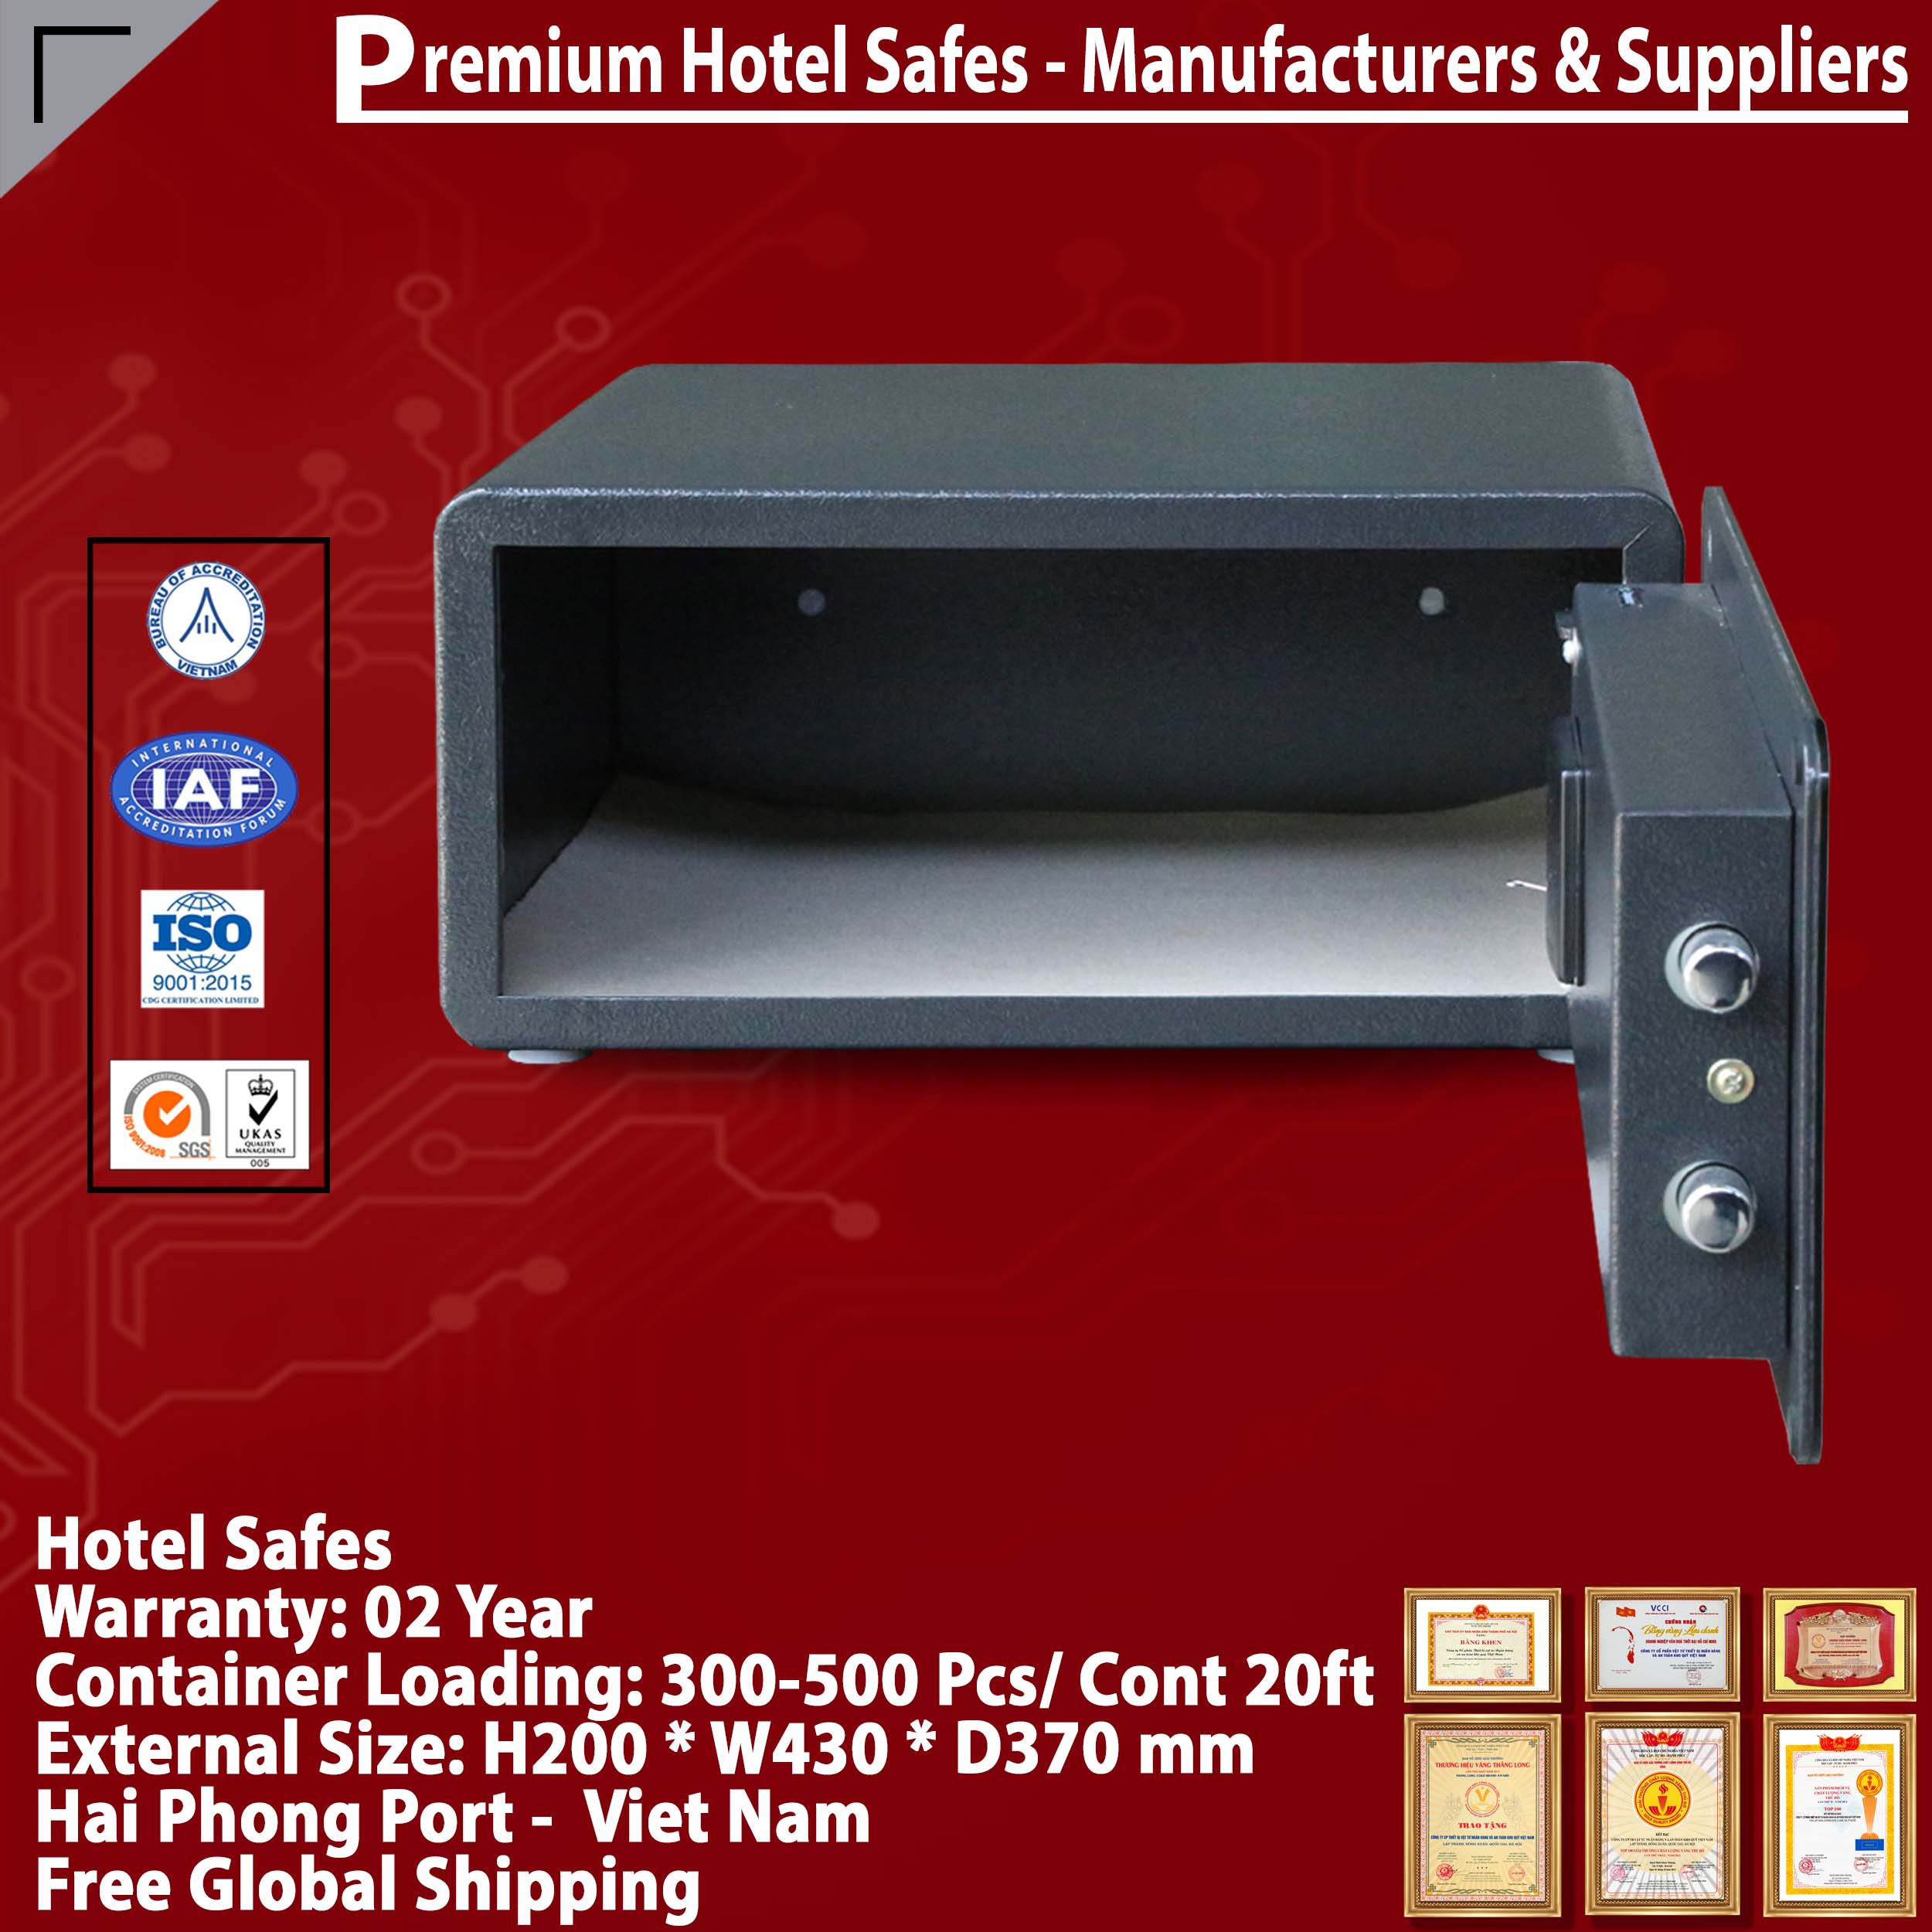 Best Hotel Safe For Home Made In Viet Nam